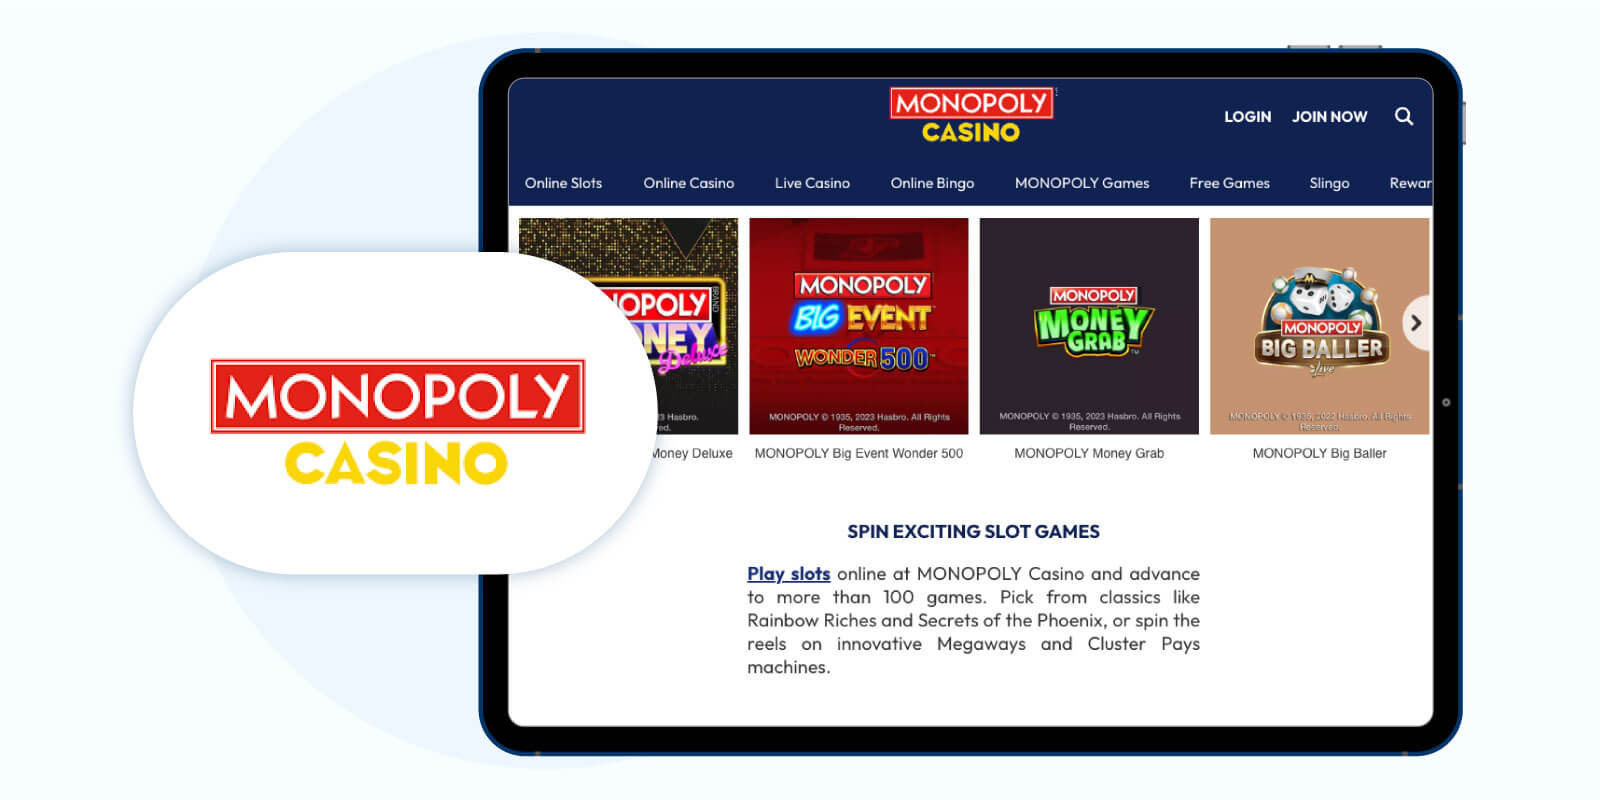 Monopoly Casino - Best IGT Casino For Game Diversity